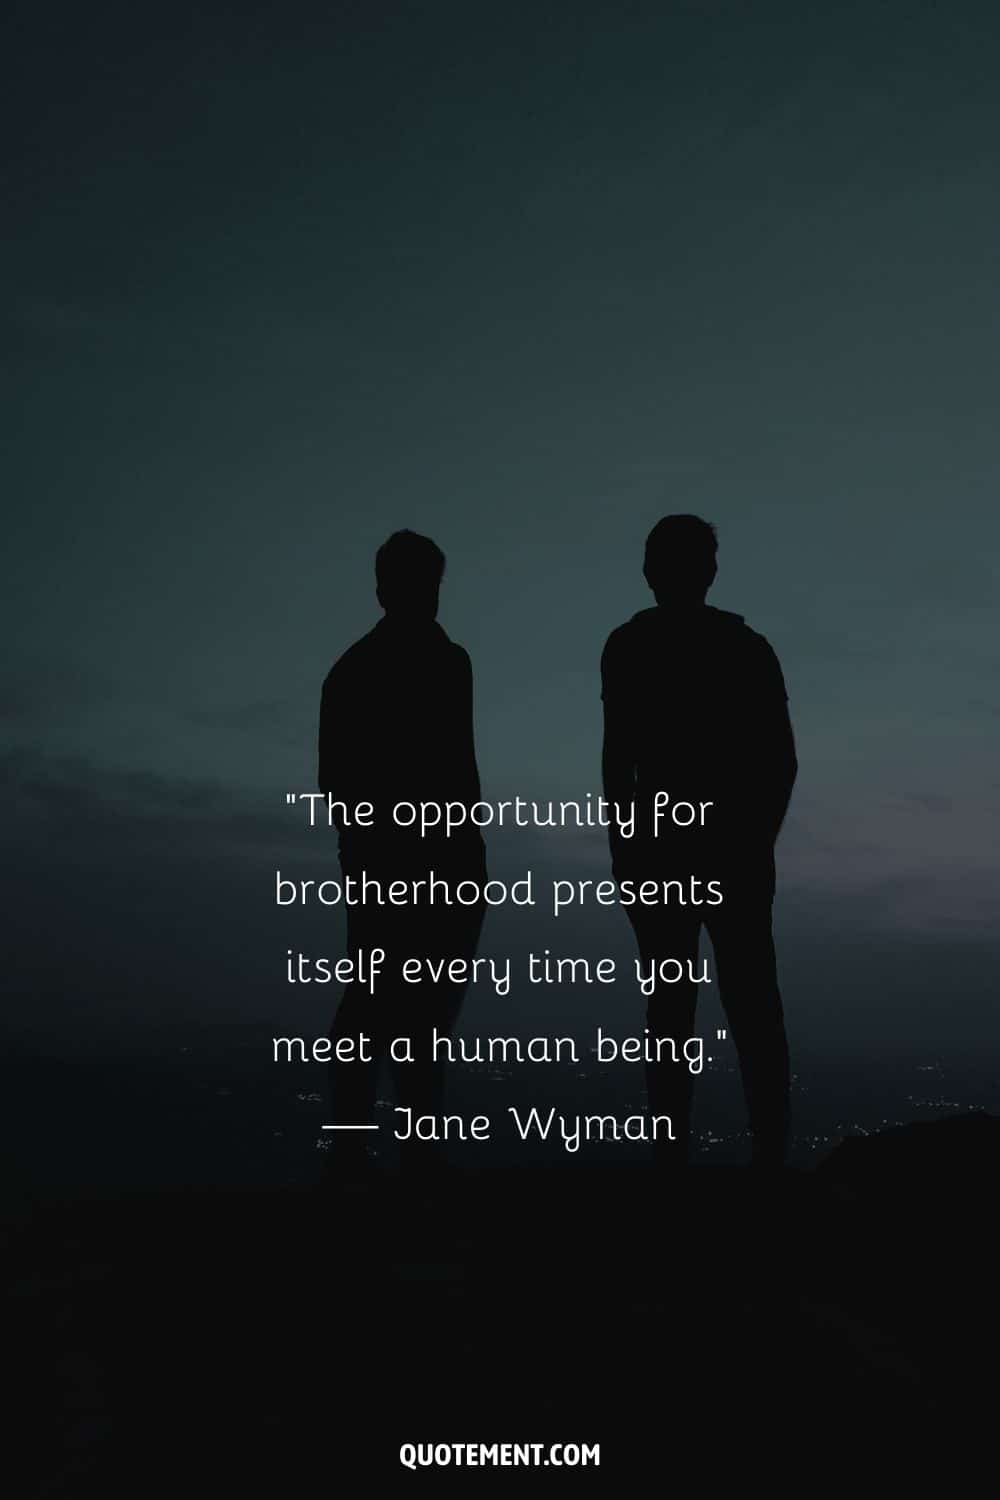 “The opportunity for brotherhood presents itself every time you meet a human being.” — Jane Wyman